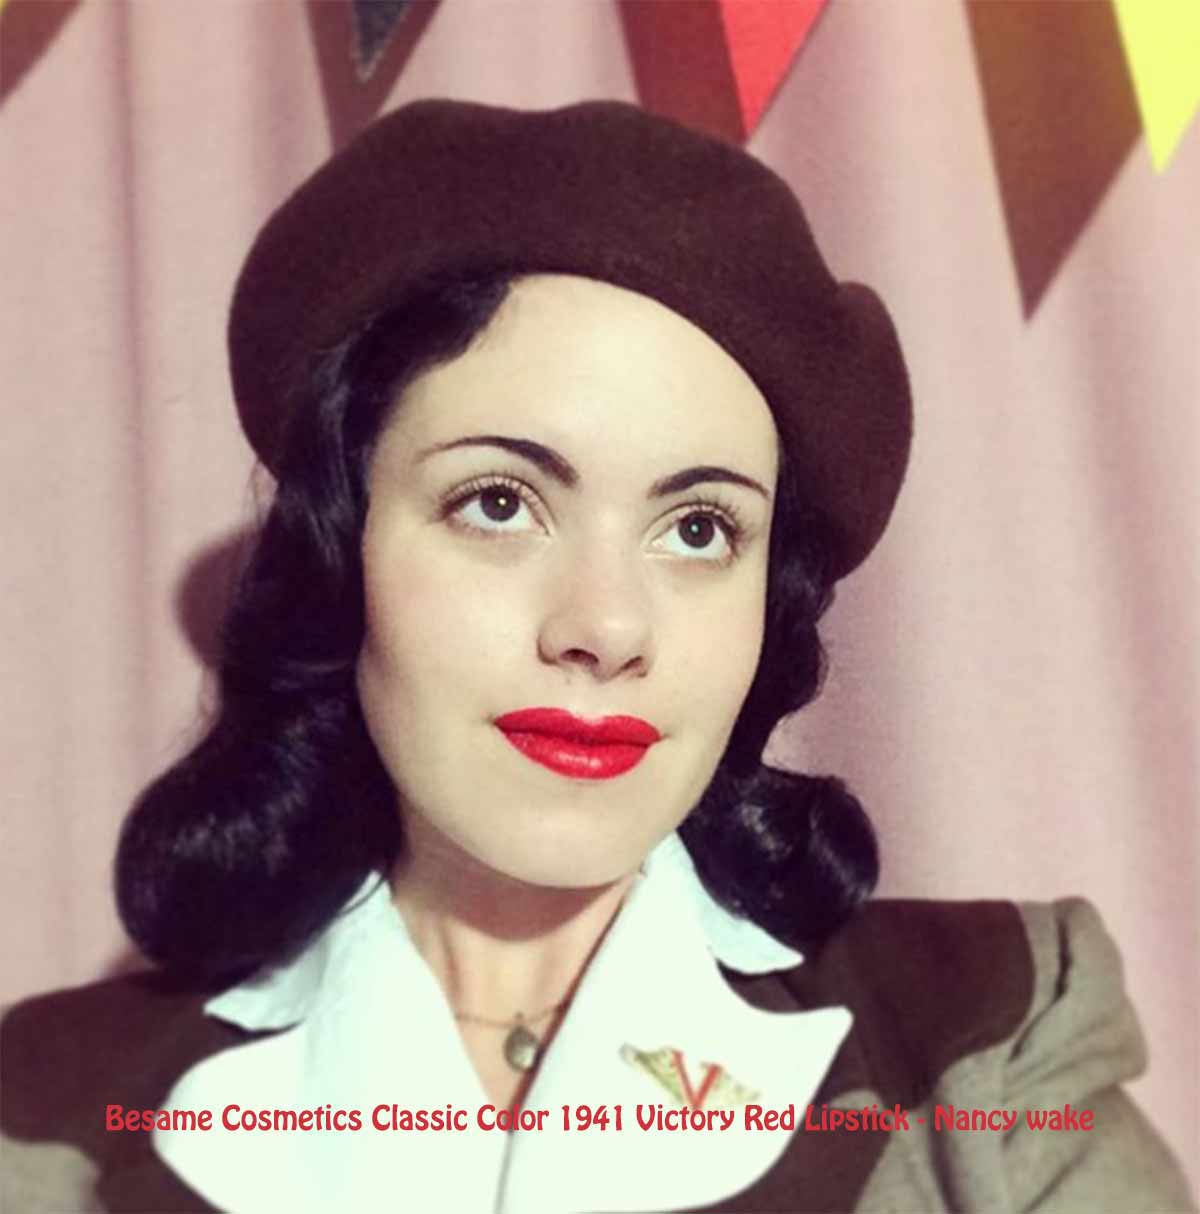 Classic Color 1941 Victory Red Lipstick - Besame Cosmetics